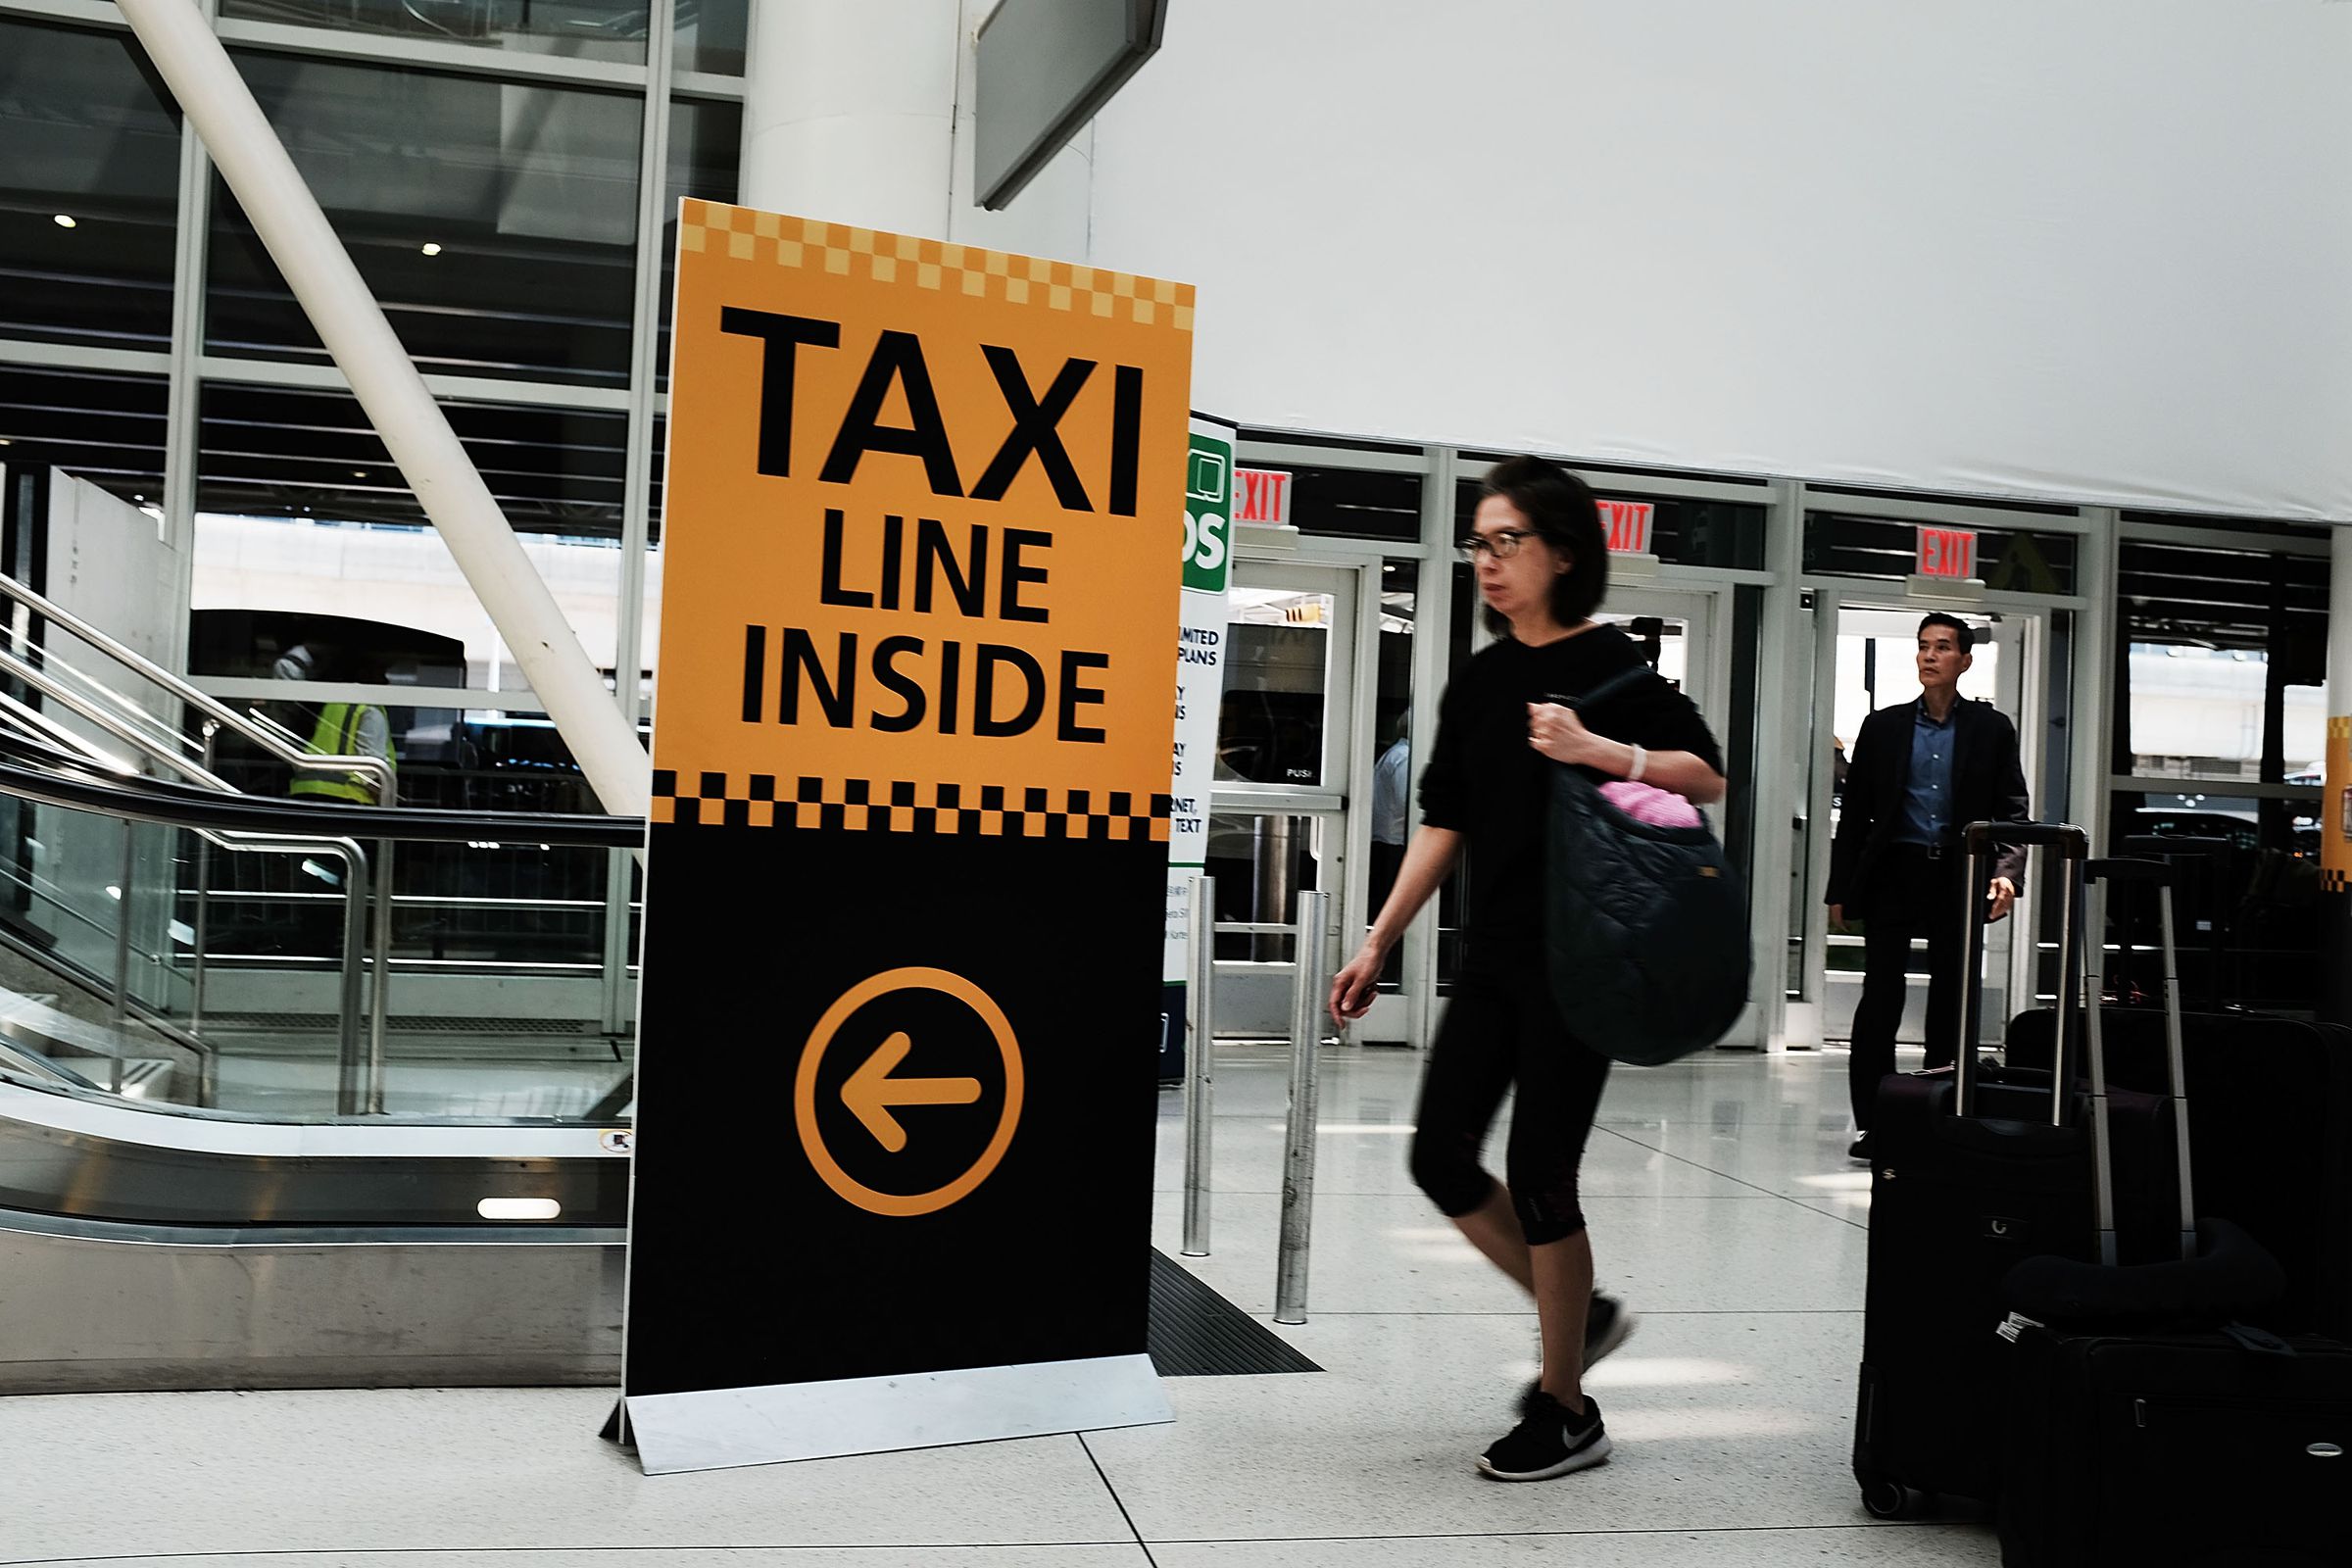 NEW YORK, NY - JUNE 19: A sign advertises directions to a taxi stand at John F. Kennedy (JFK) Airport on June 19, 2018 in New York City.